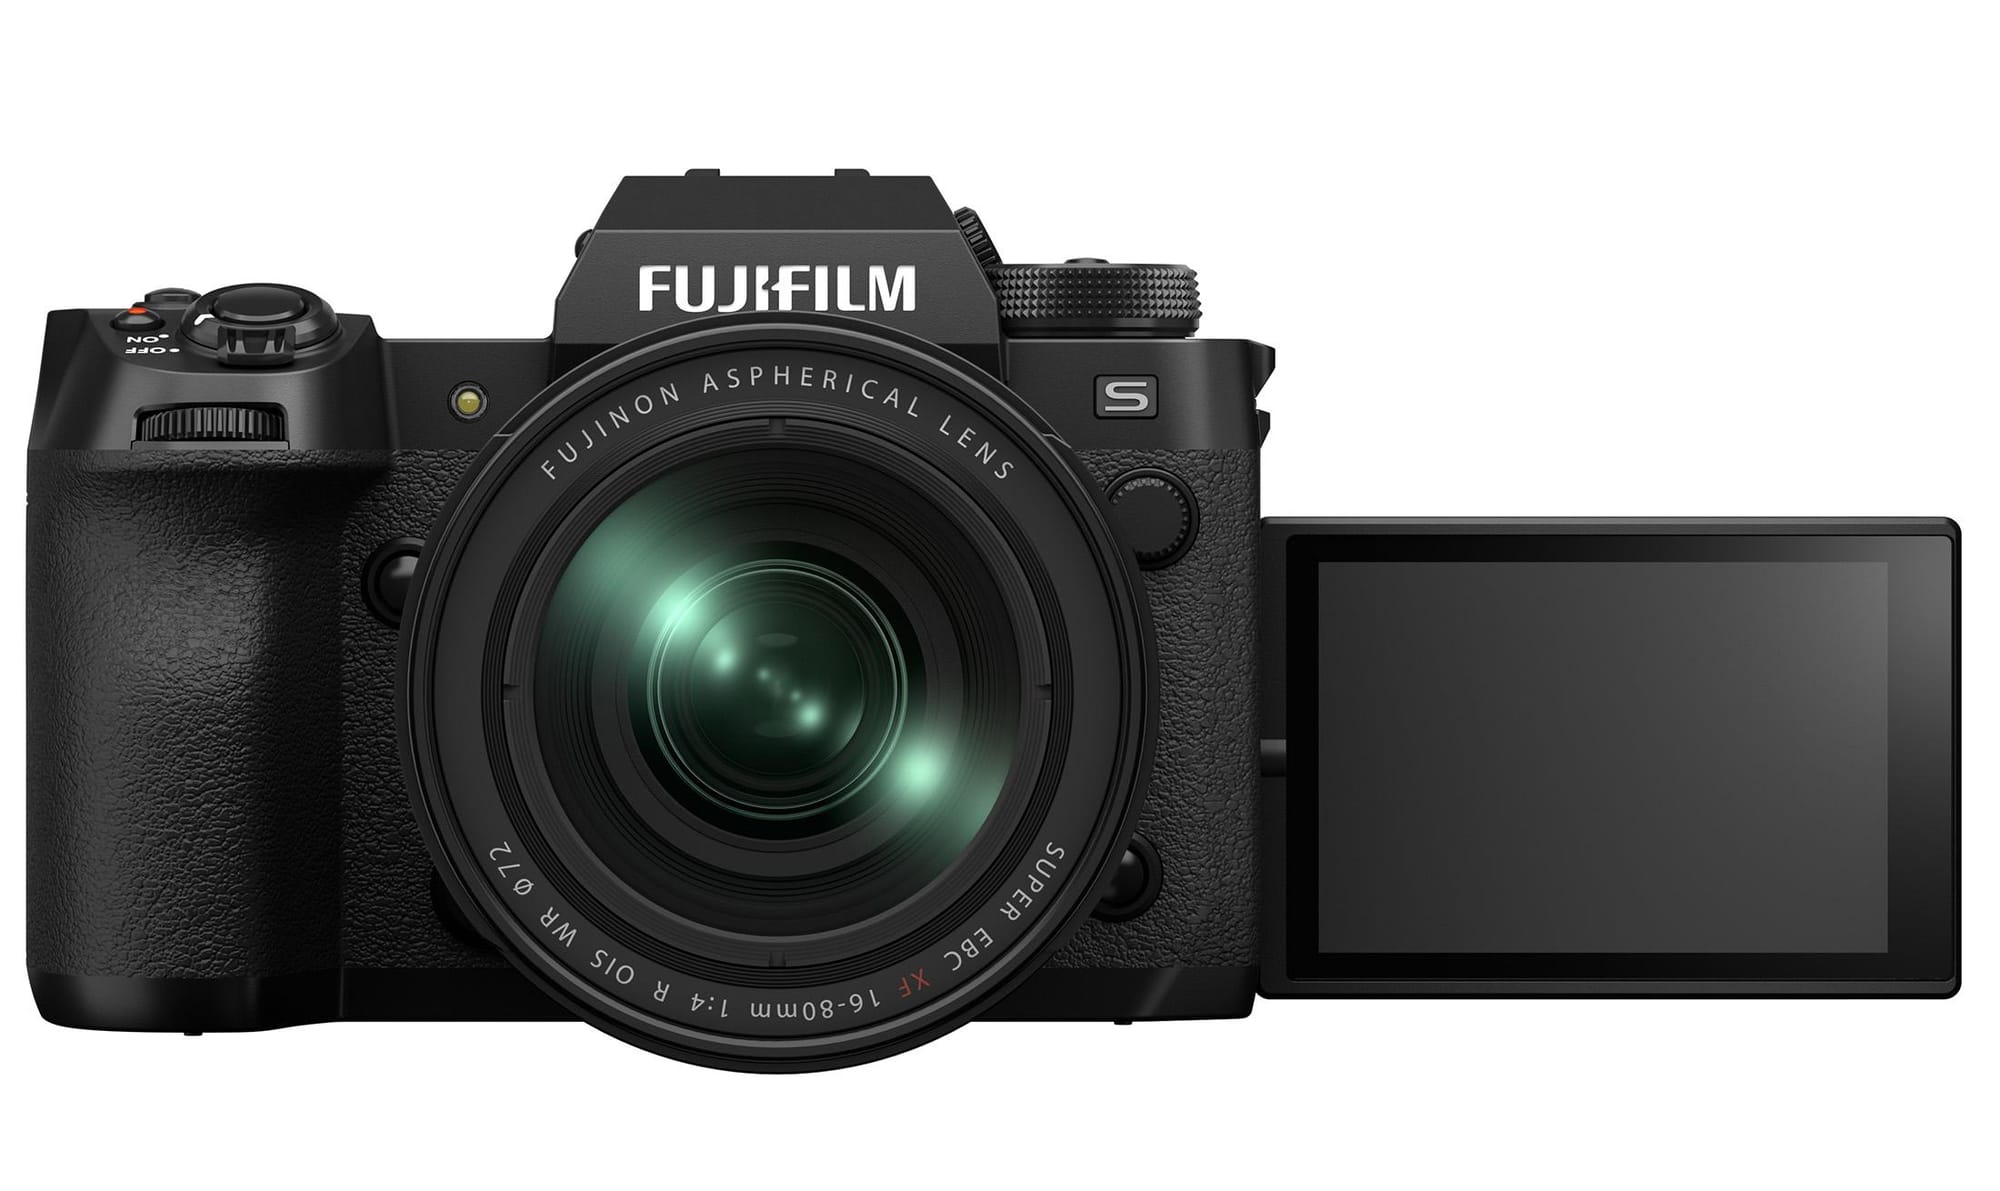 Fujifilm launches new flagship APS-C mirrorless camera with X-H2S